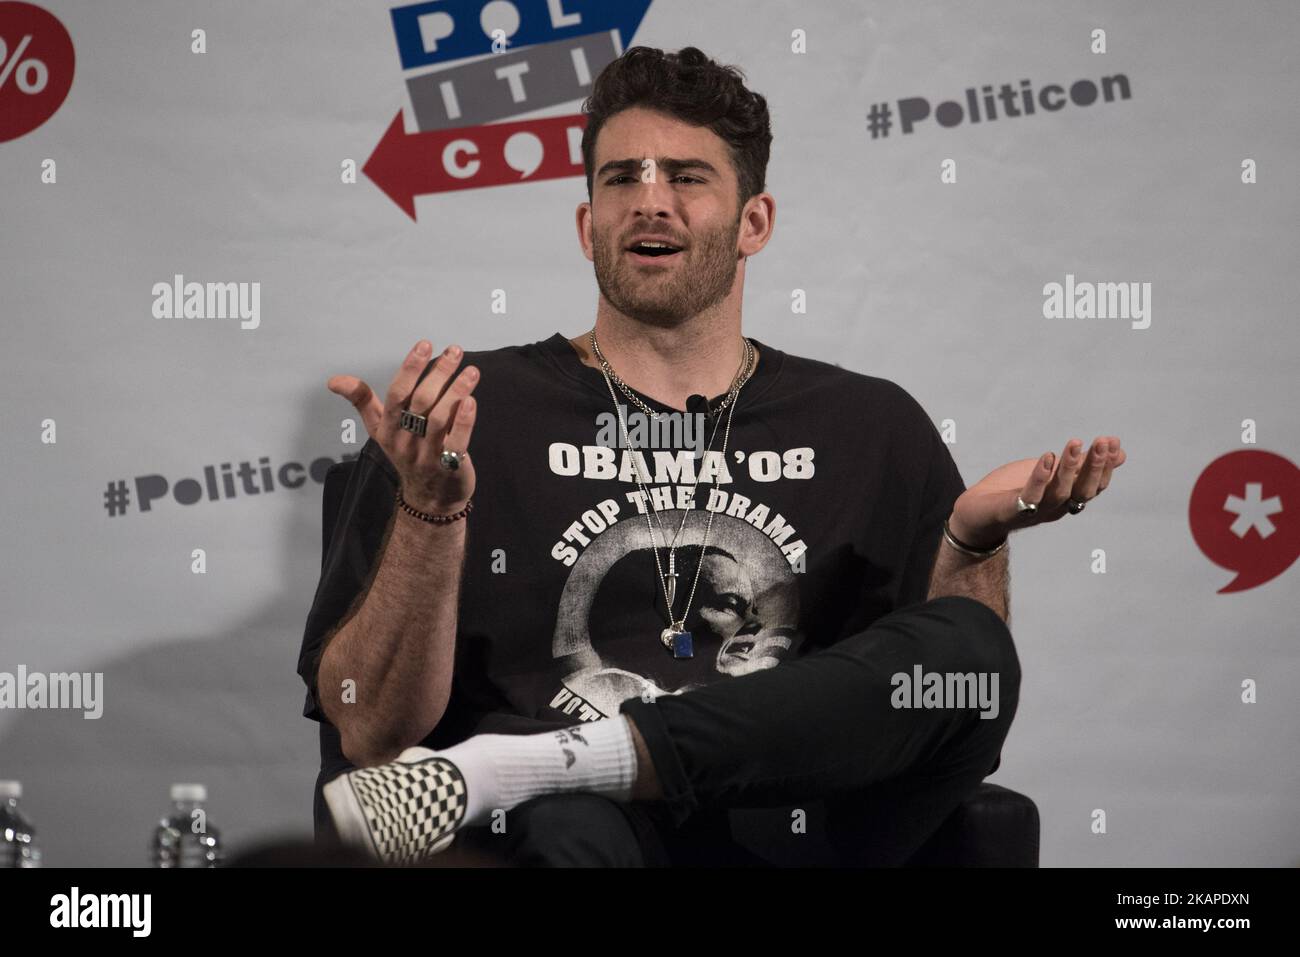 Hasan Piker of The Young Turks Network speaks during Politicon at the Pasadena Convention Center in Pasadena, California on July 29, 2017. Politicon is a bipartisan convention that mixes politics, comedy and entertainment. (Photo by Ronen Tivony/NurPhoto) *** Please Use Credit from Credit Field *** Stock Photo